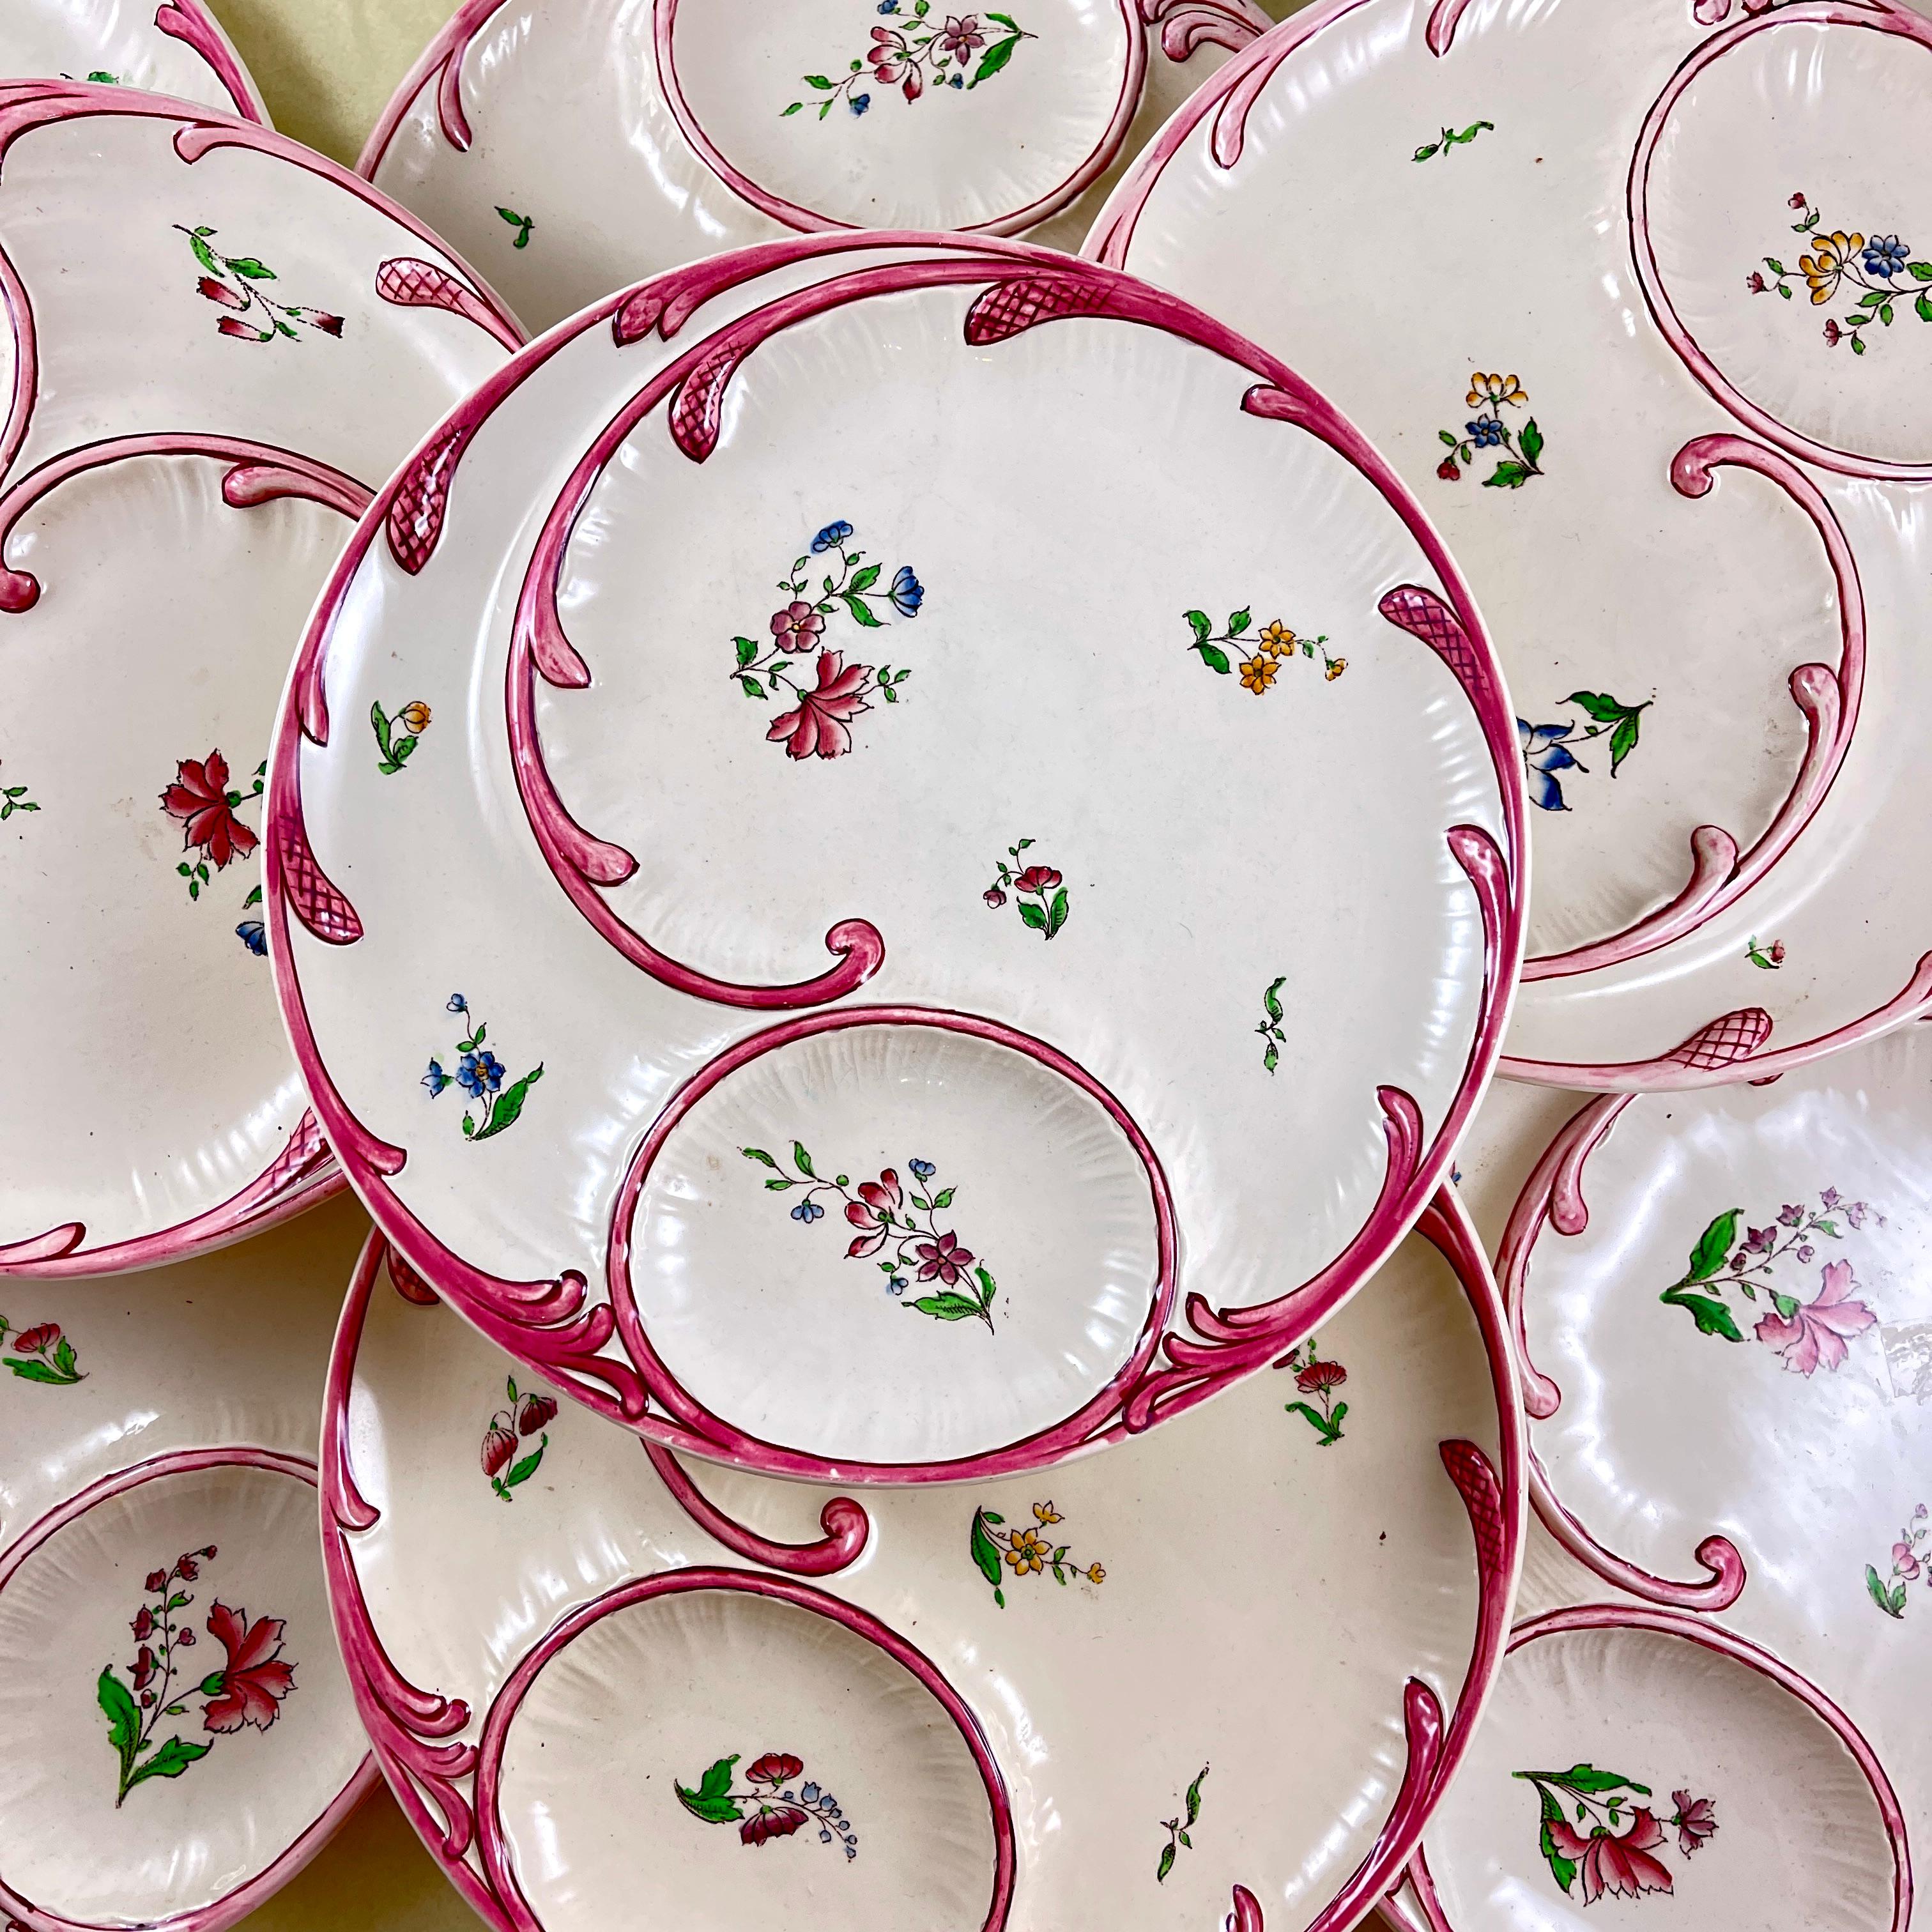 A French faïence hand painted asparagus plate in the Strasbourg pattern from Sarreguemines, circa 1890-1900.

Showing charming naive floral décor, multiple plates are available, each varying slightly in their decoration. The pink asparagus border